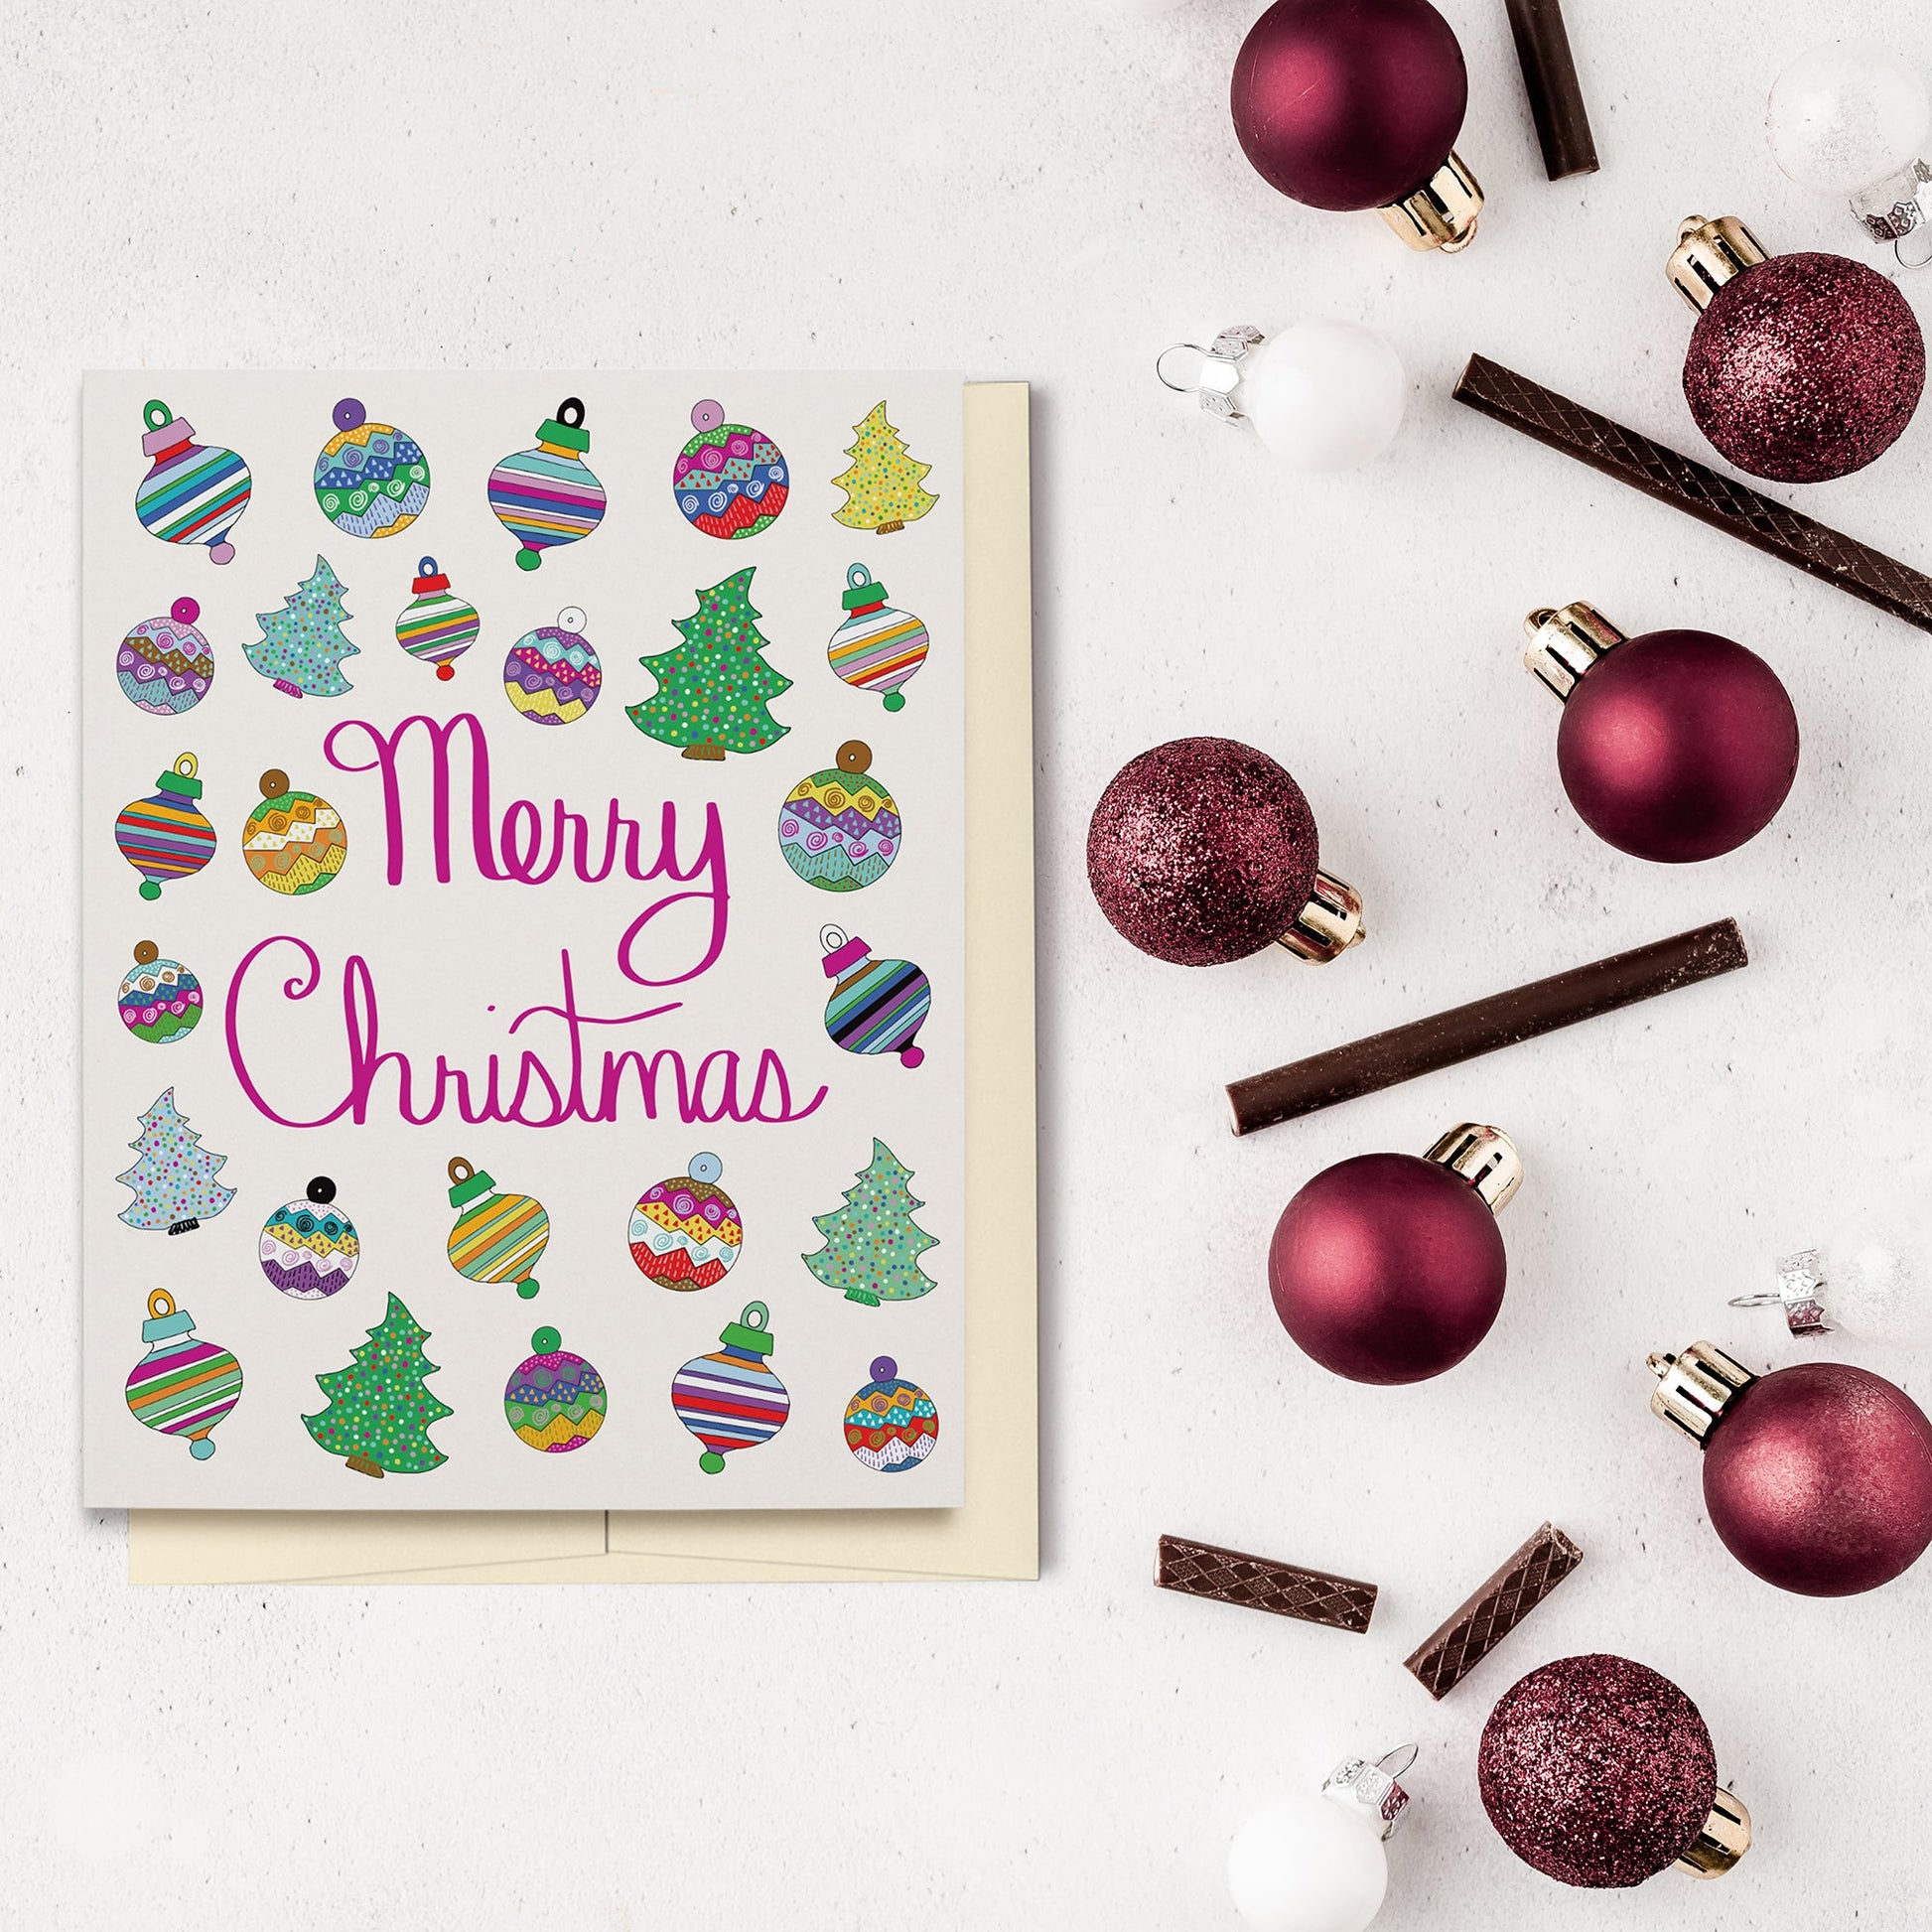 Fun & Festive Merry Christmas Card featuring hand drawn colorful ornaments & Christmas trees with fuchsia-colored hand lettered "Merry Christmas" script. Displayed on a white cement backgrounds with red ornaments and chocolate candy.